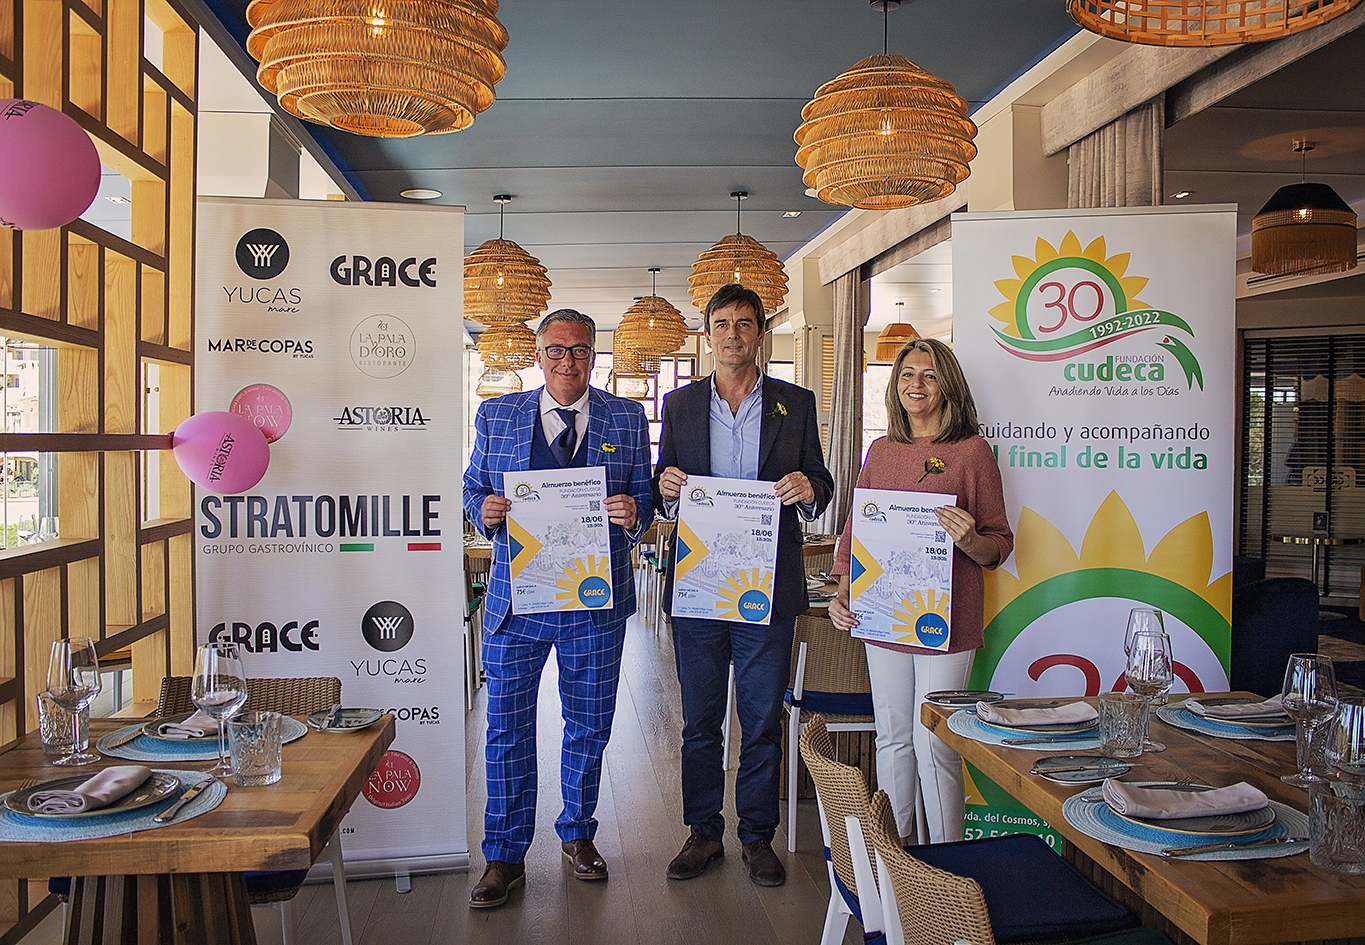 Stratomille Group and CUDECA present the Cudeca 30th Anniversary Charity Luncheon at GRACE in Riviera